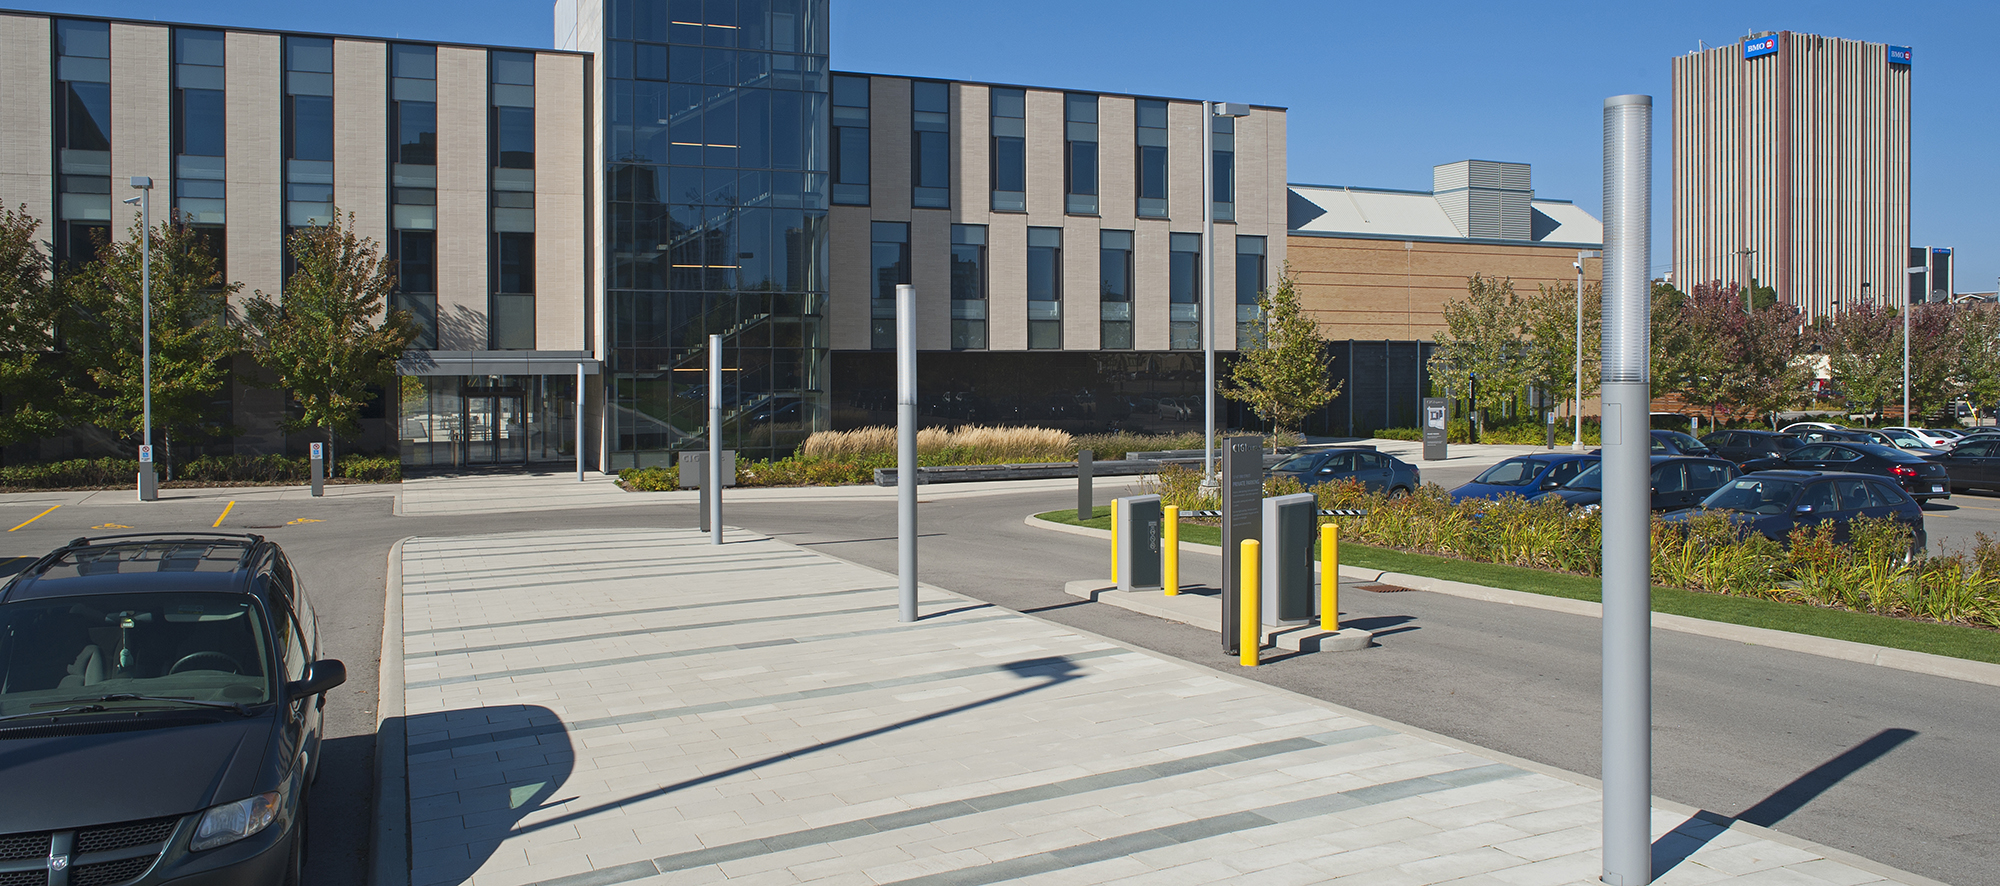 Umbriano pavers are used for the walkway leading to CIGI Campus, surrounded by an active parking lot.